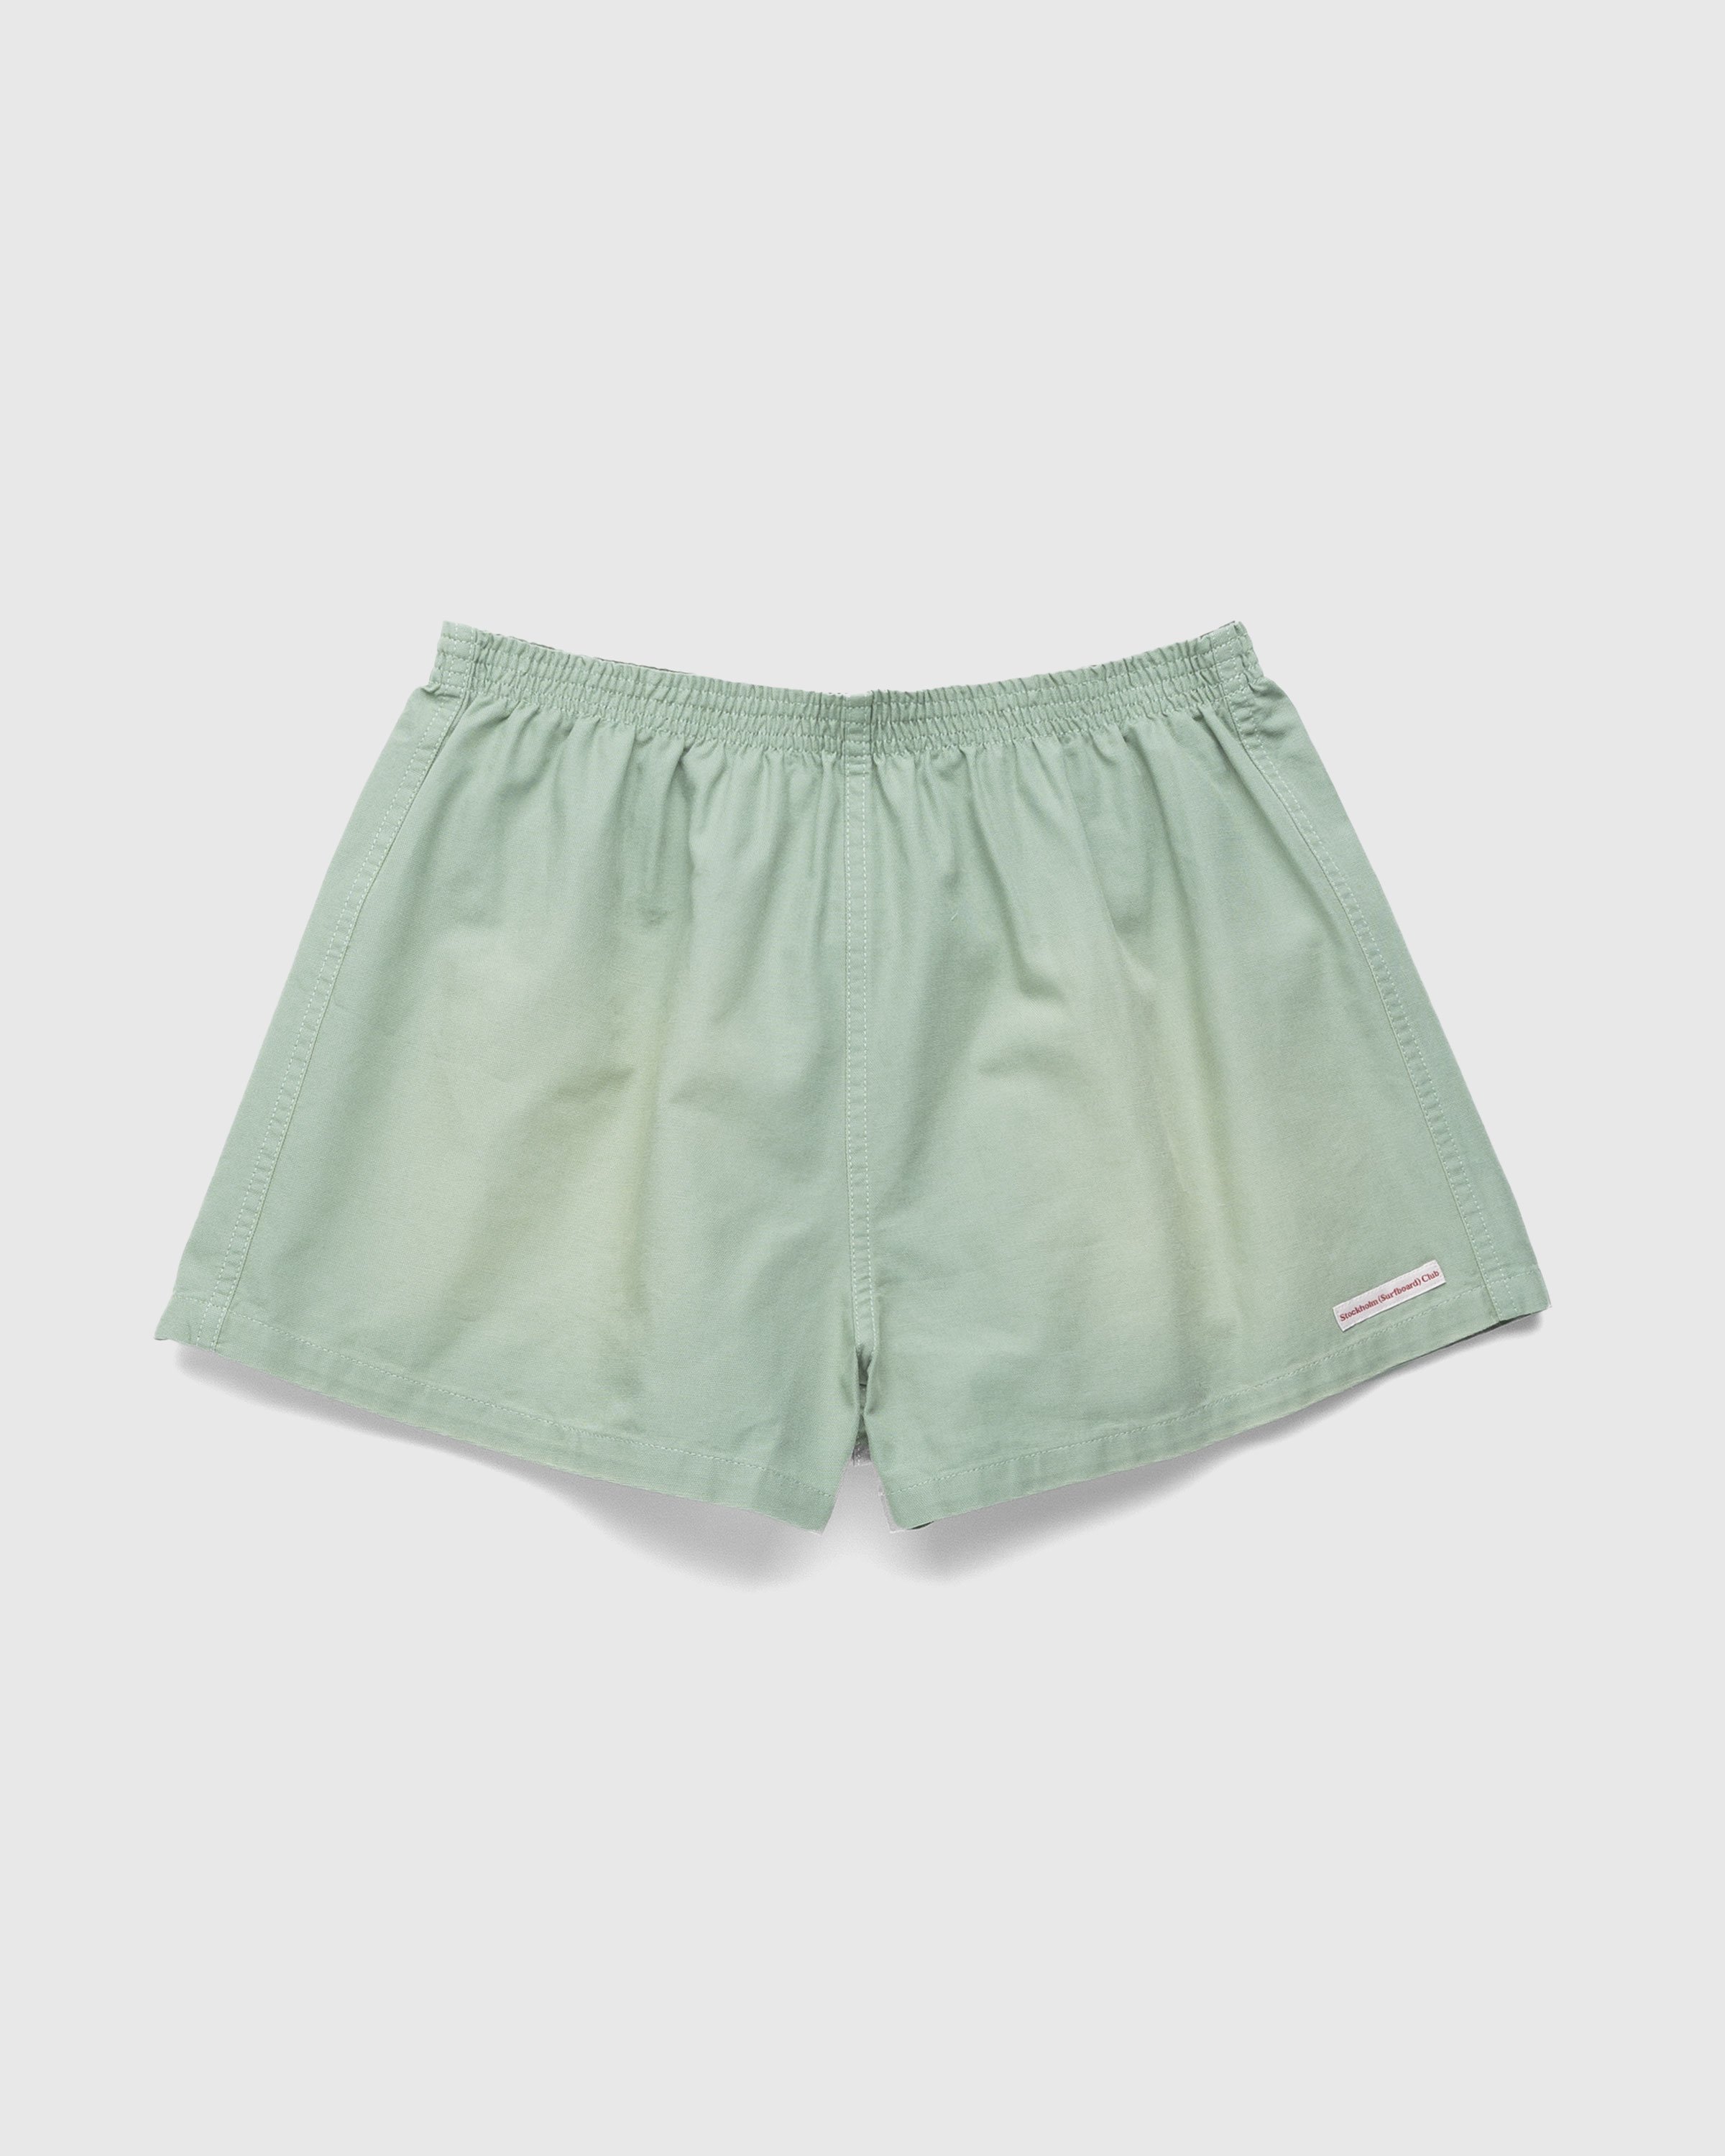 Stockholm Surfboard Club - Lightweight Cotton Canvas Shorts Sage - Clothing - Green - Image 1